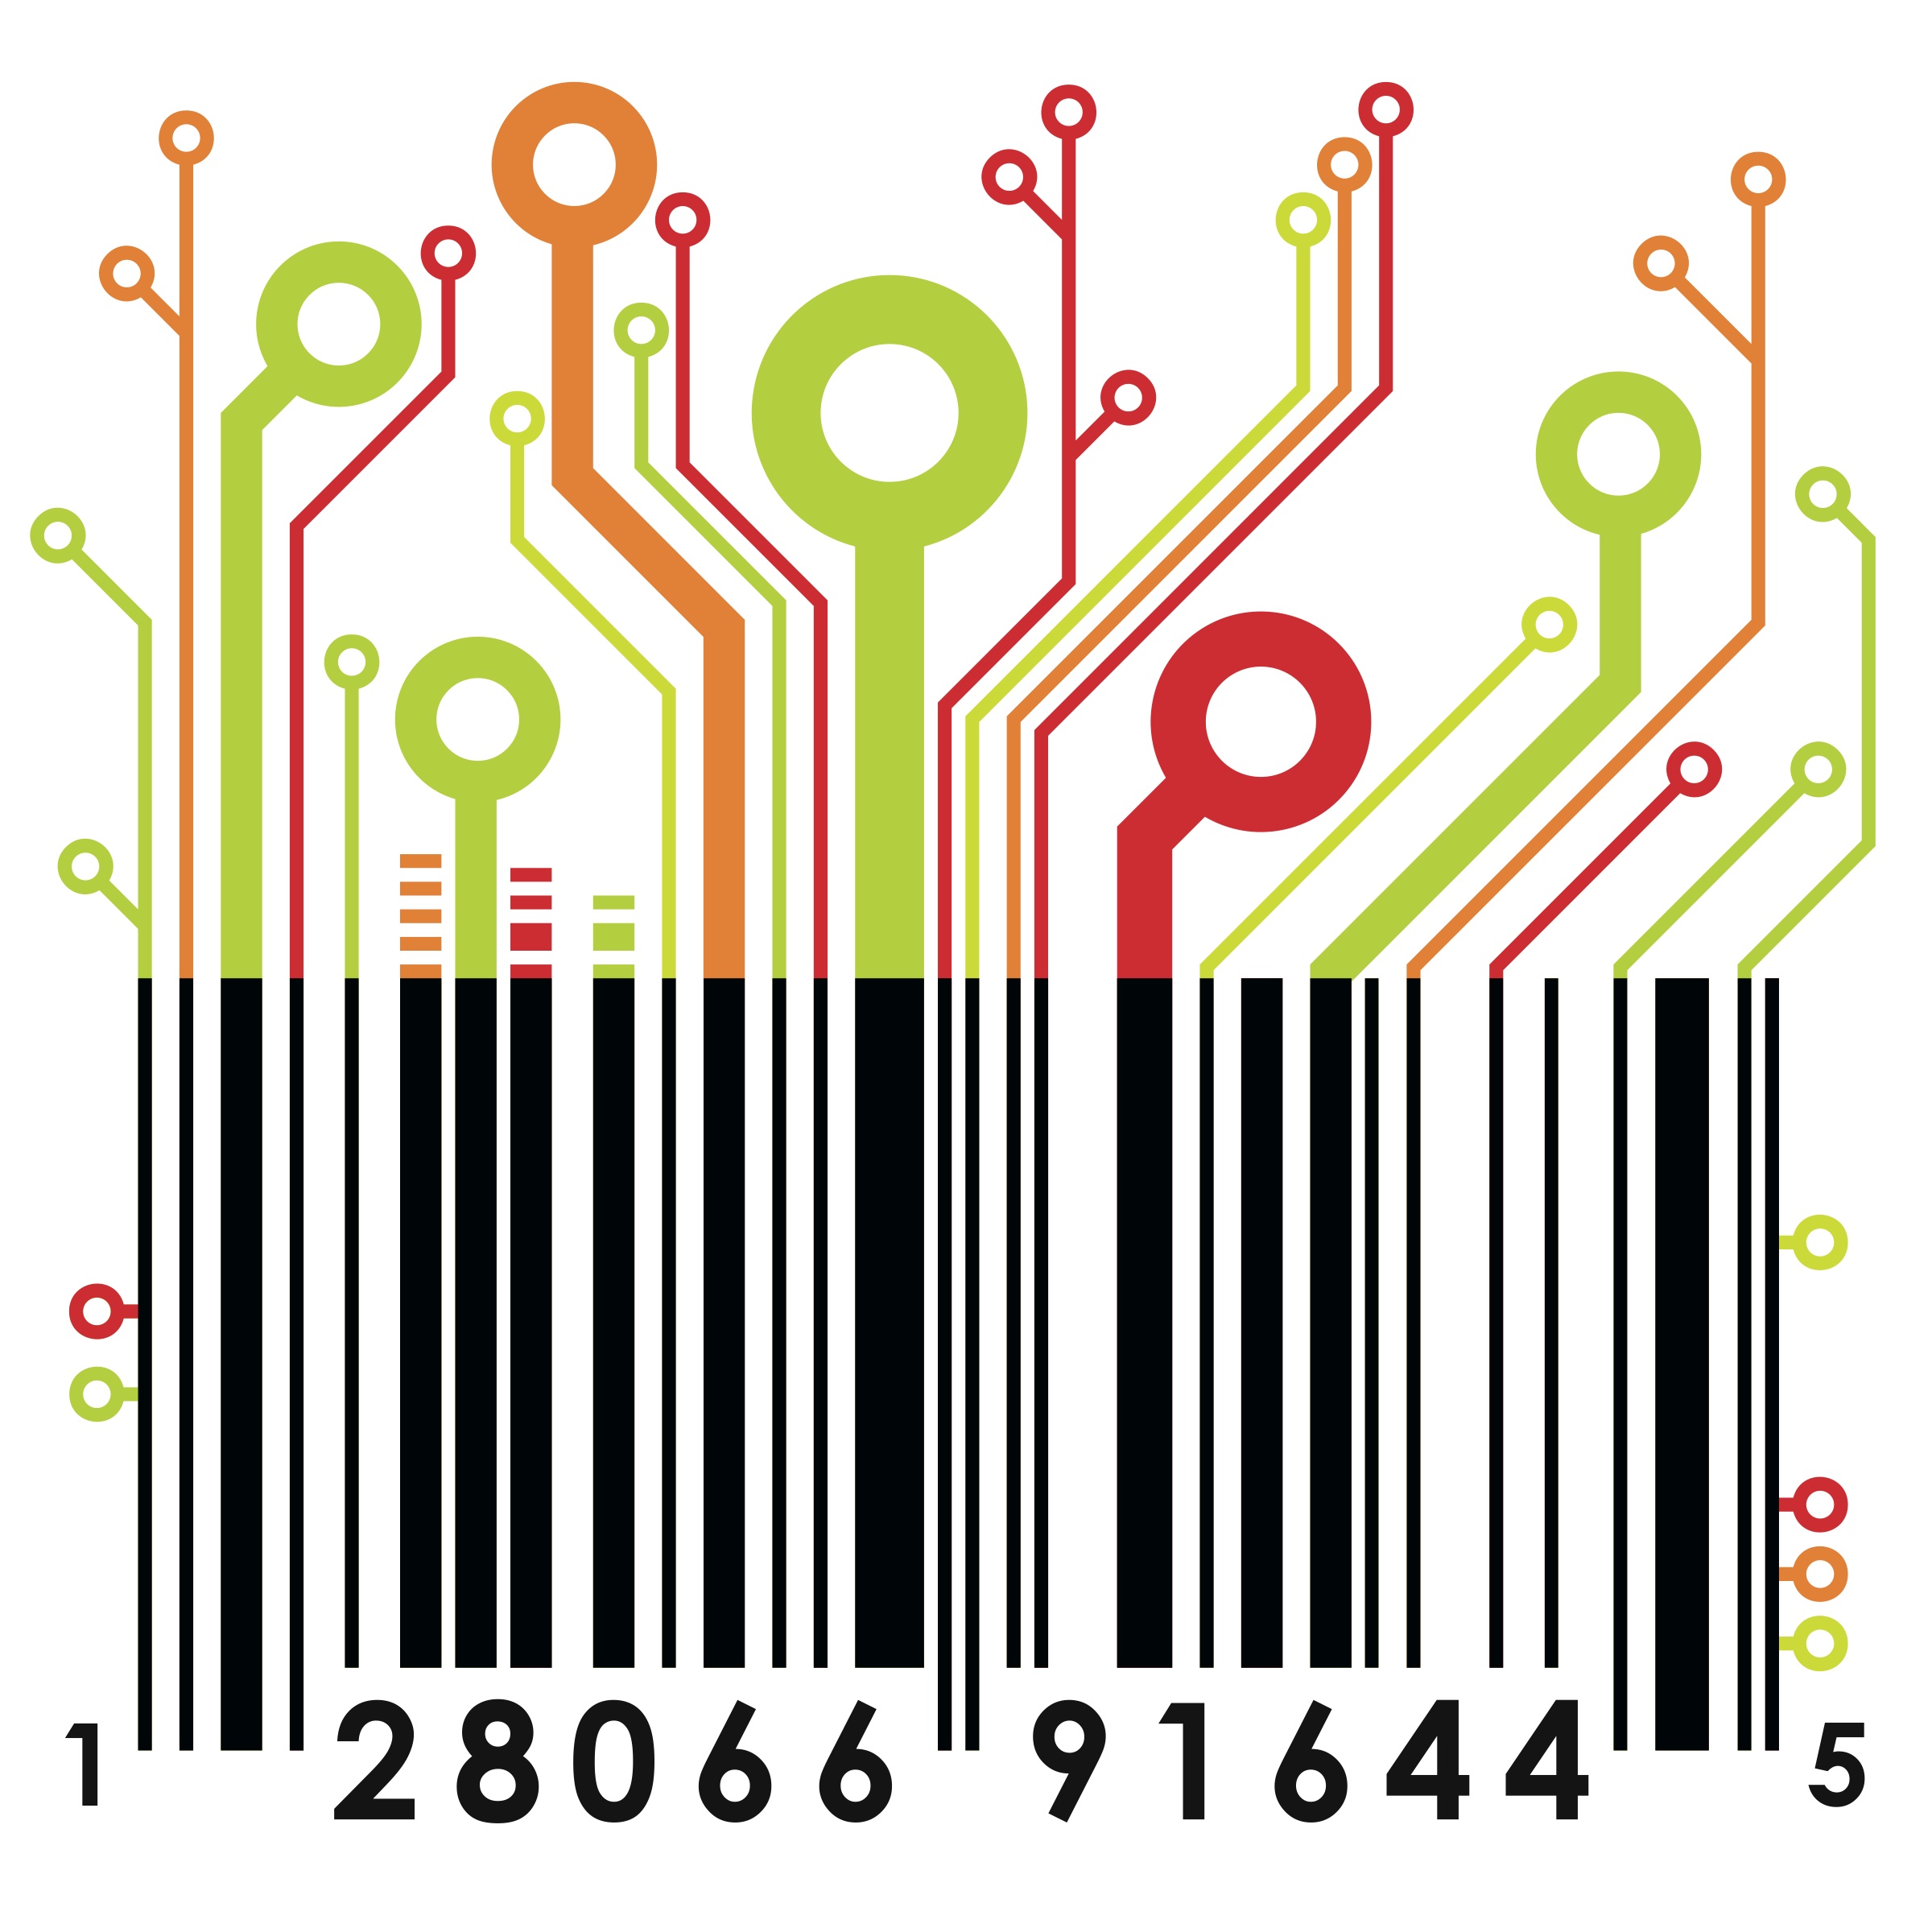 barcode clipart free - photo #35